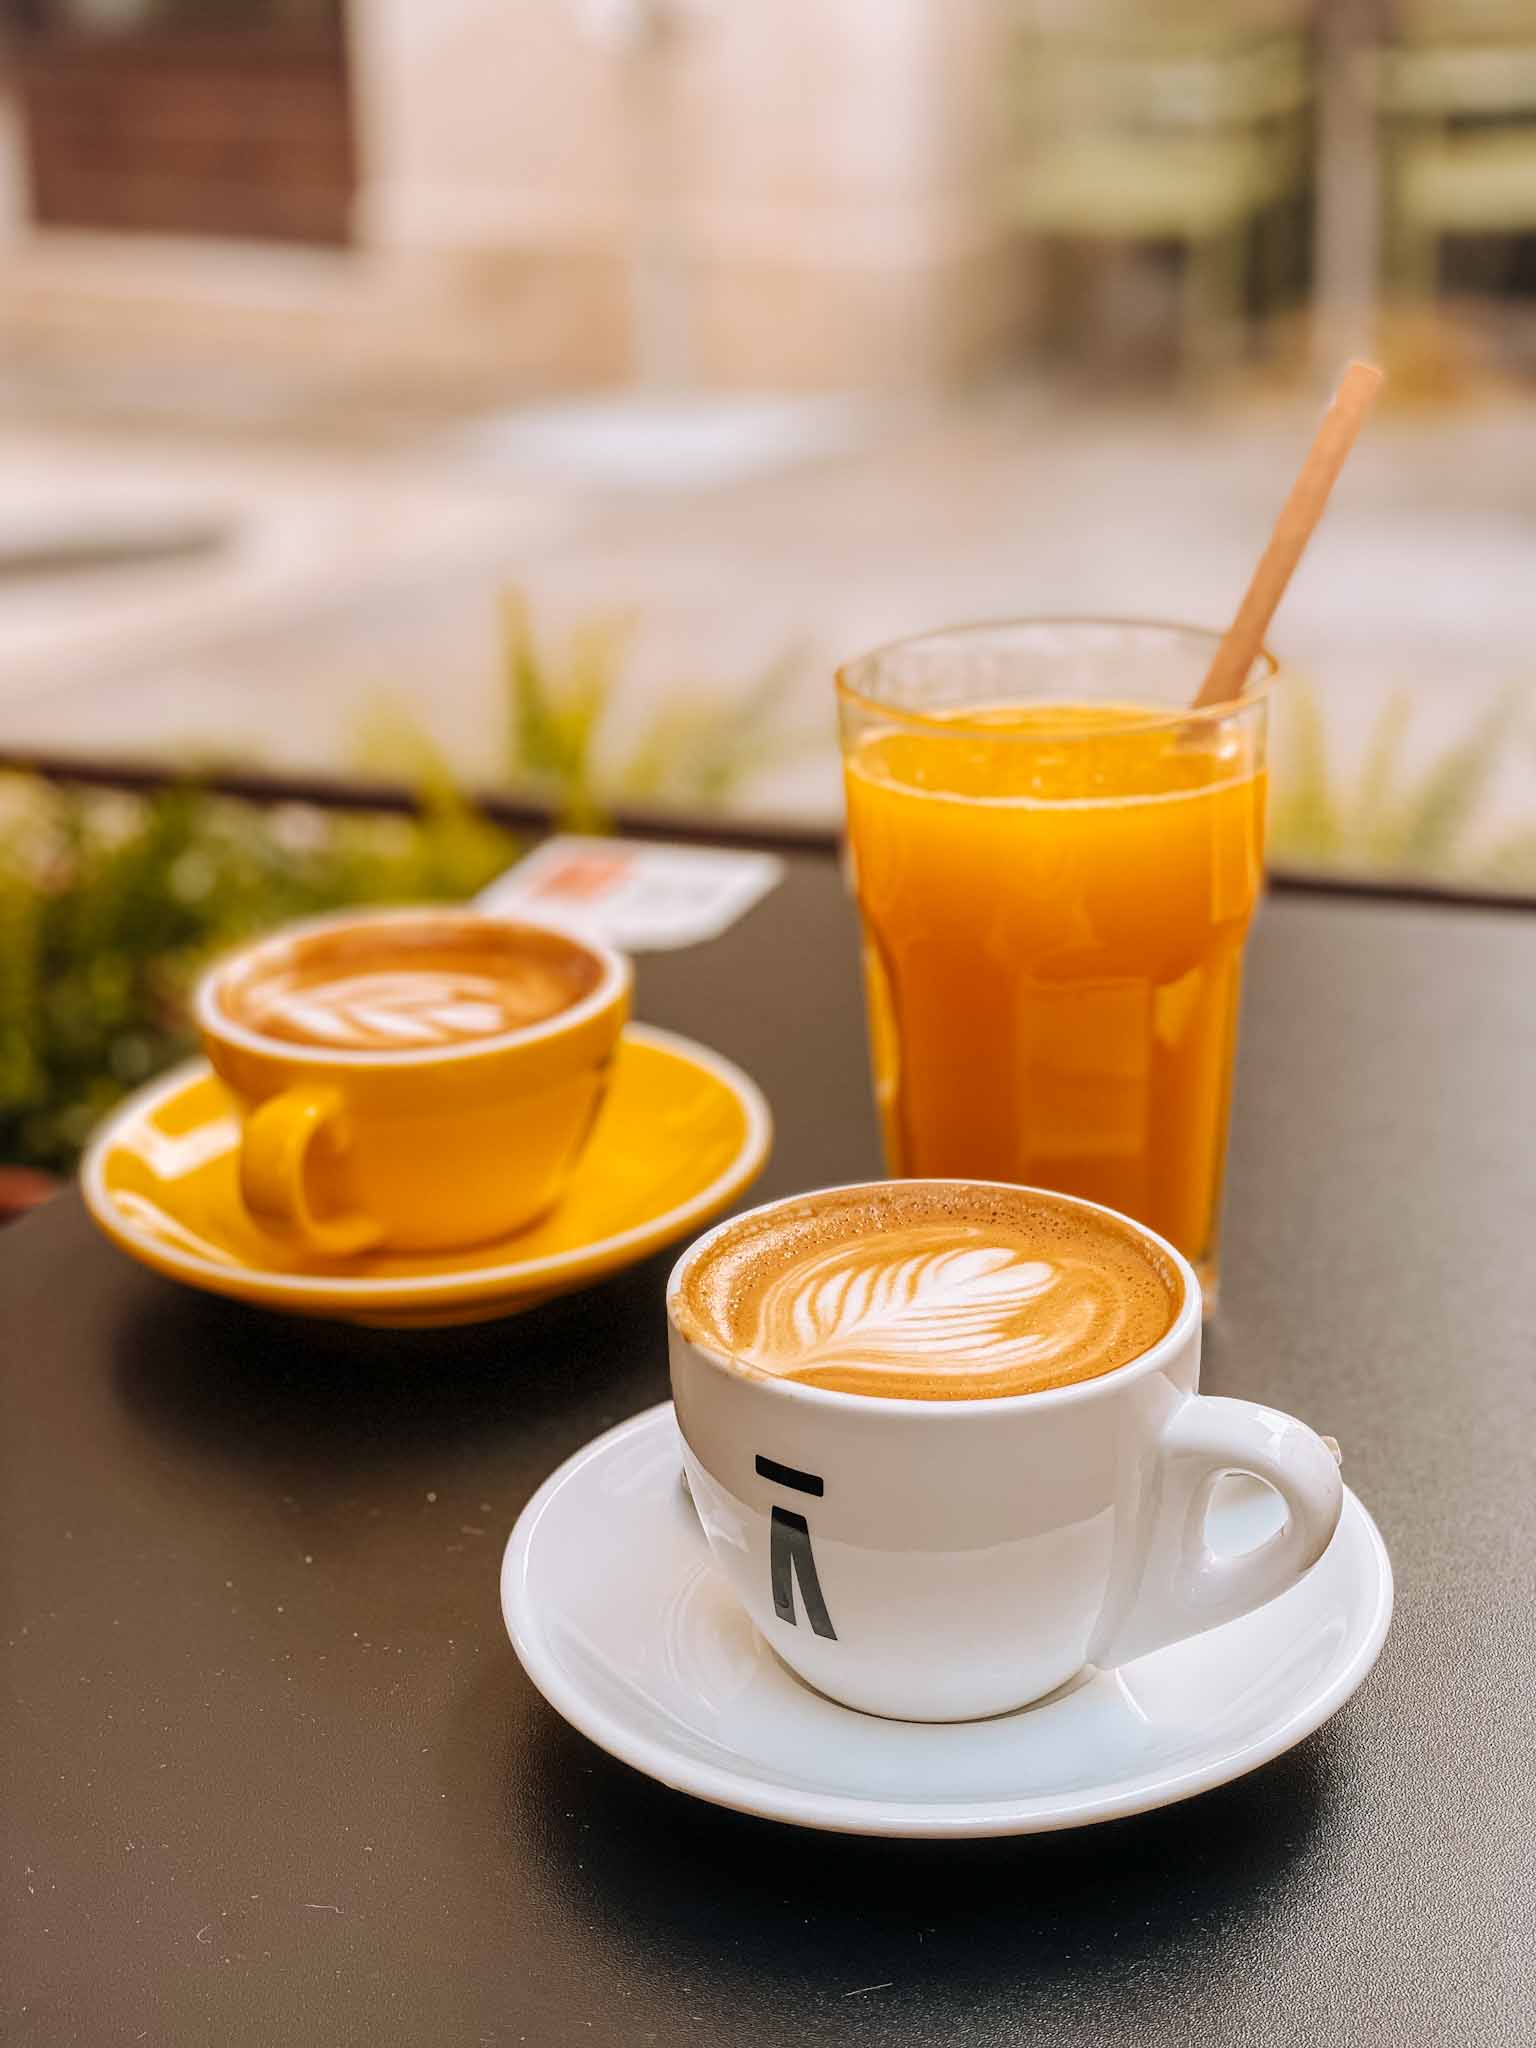 Breakfast, brunch and specialty coffee cafes and restaurants in Malaga, Spain